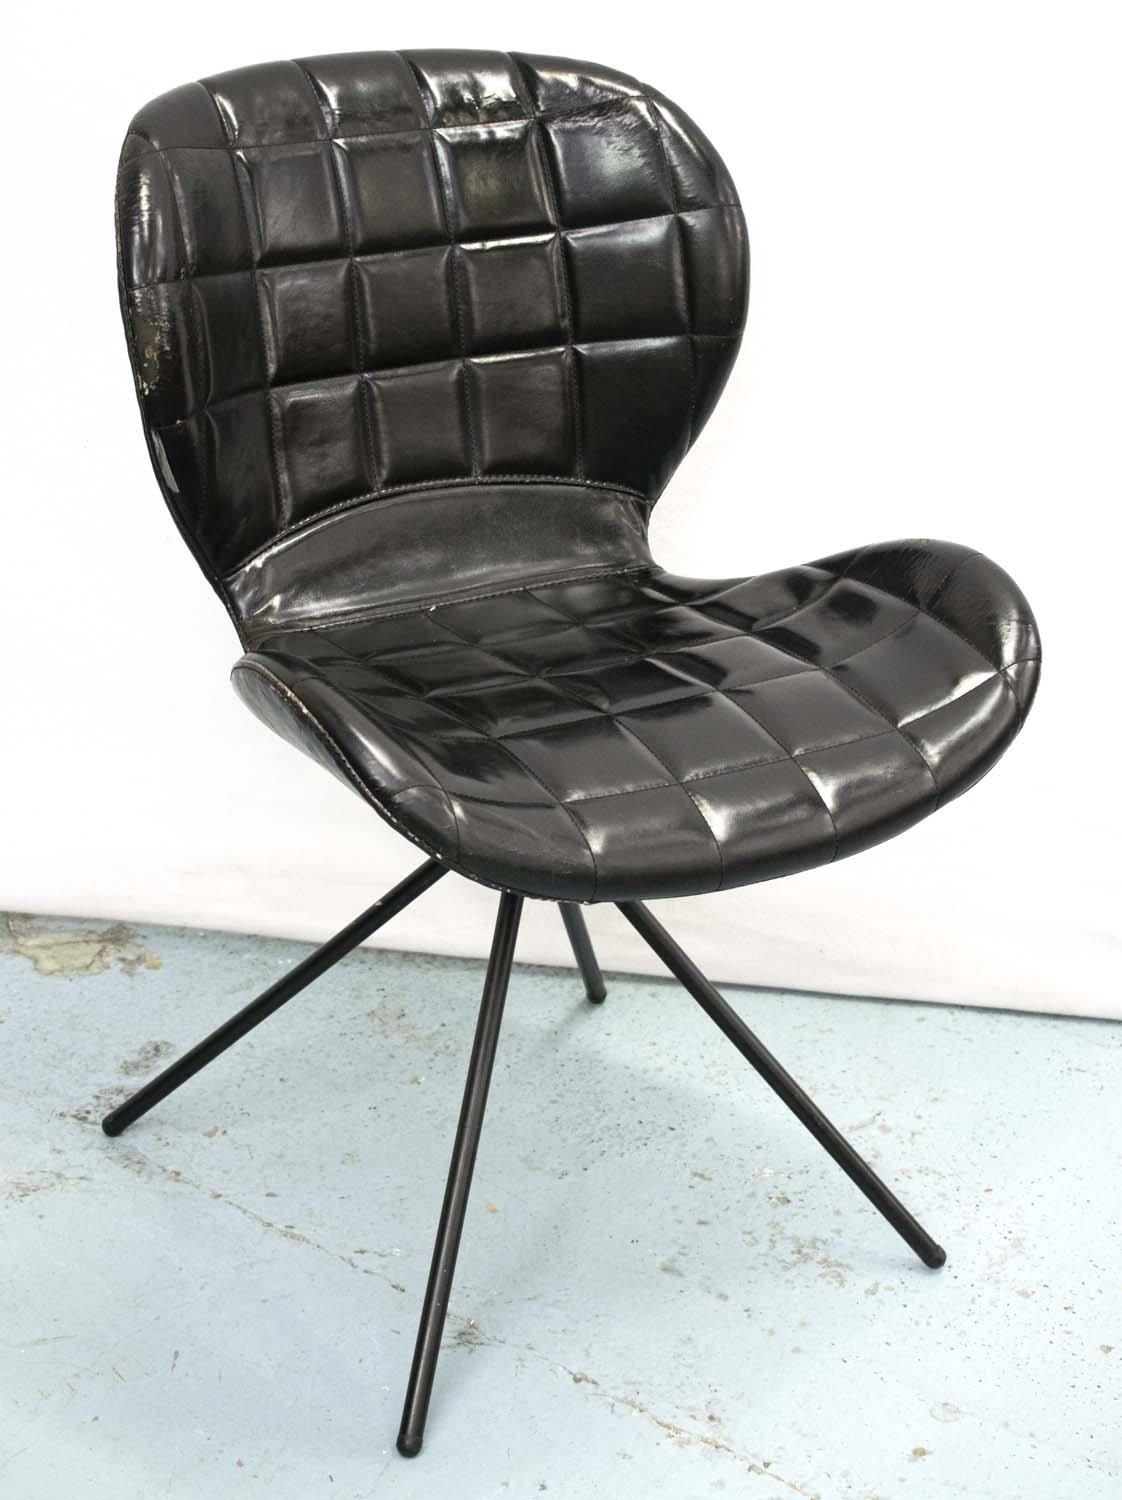 ZUIVER OMG CHAIRS, a set of four, 78cm H, padded black leather and steel. (4) - Image 2 of 4